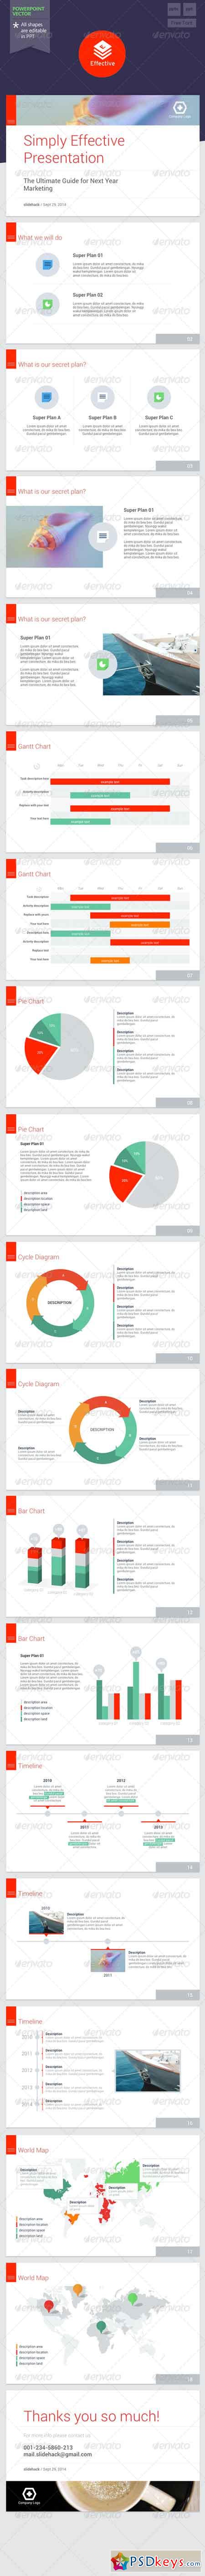 Effective - Powerpoint Template 5999312